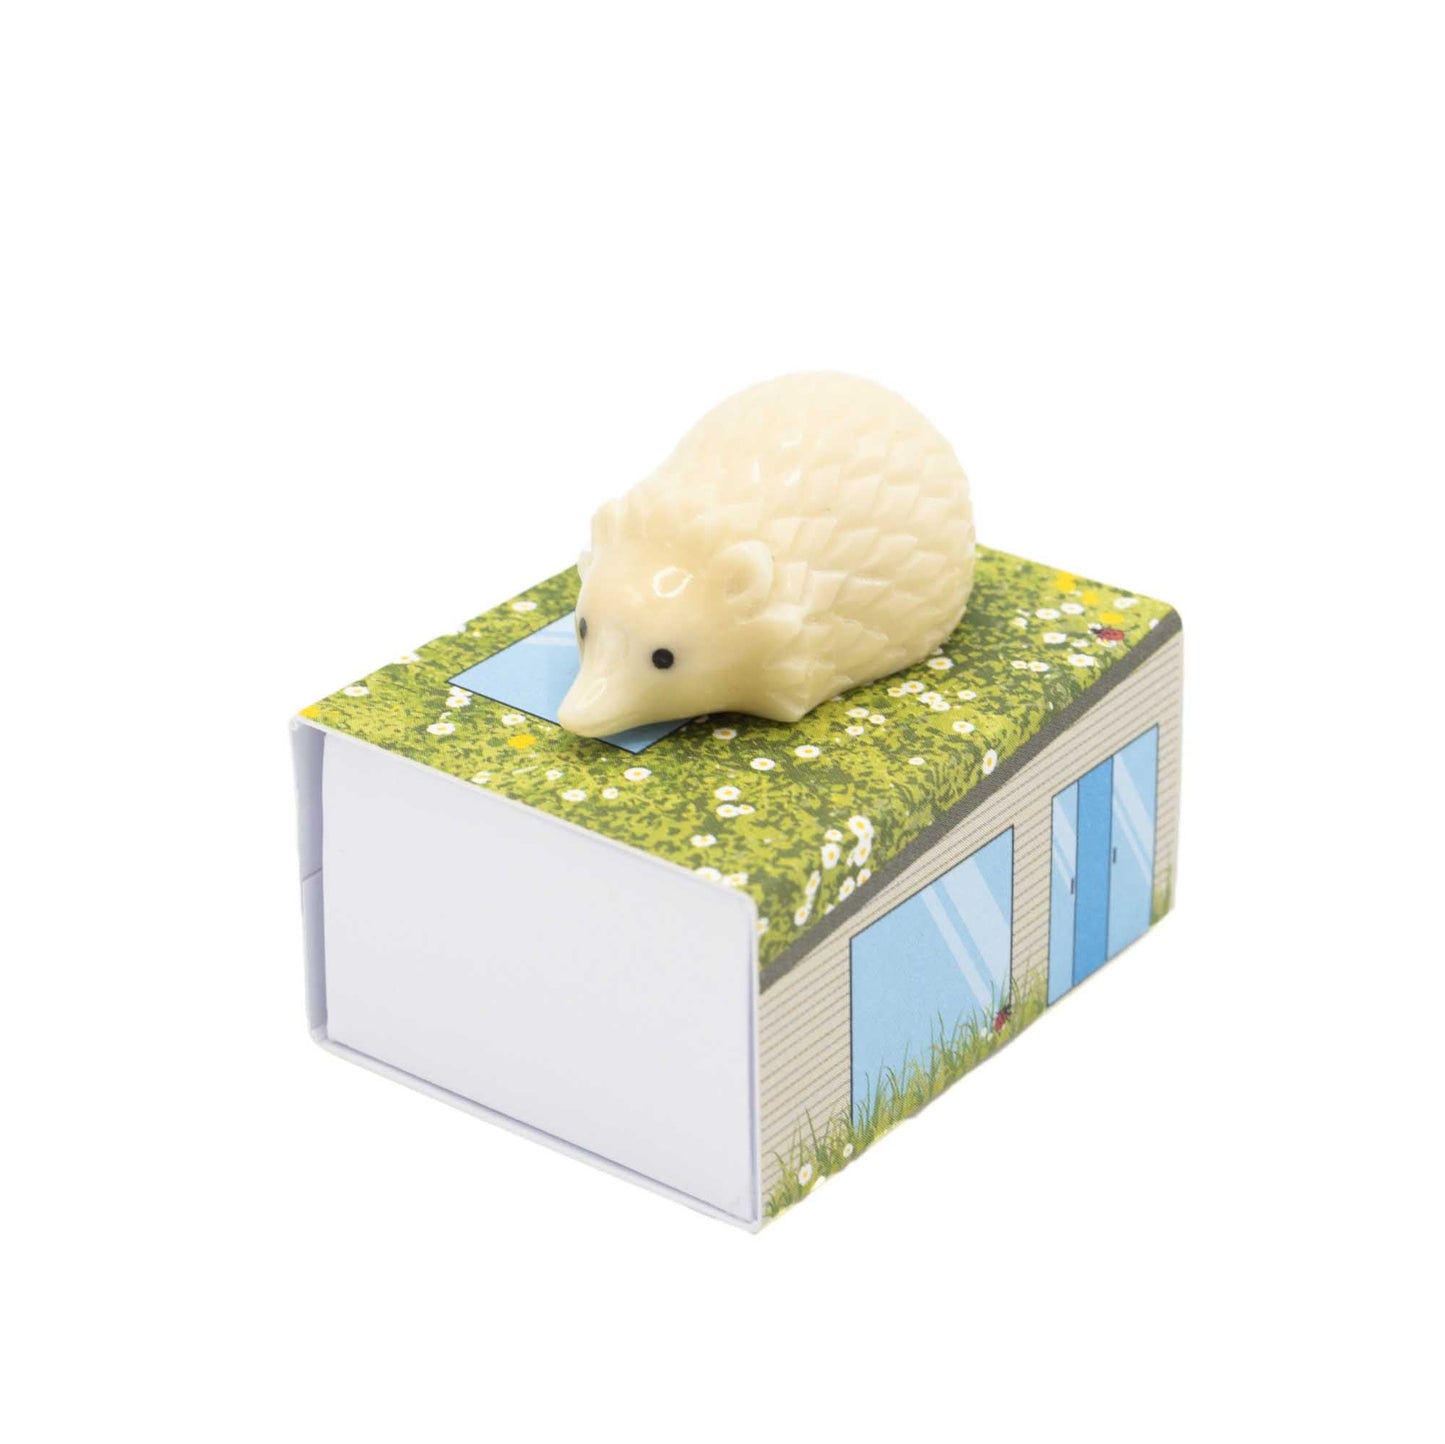 Tagua hedgehog on top of the little matchbox house it arrives in.